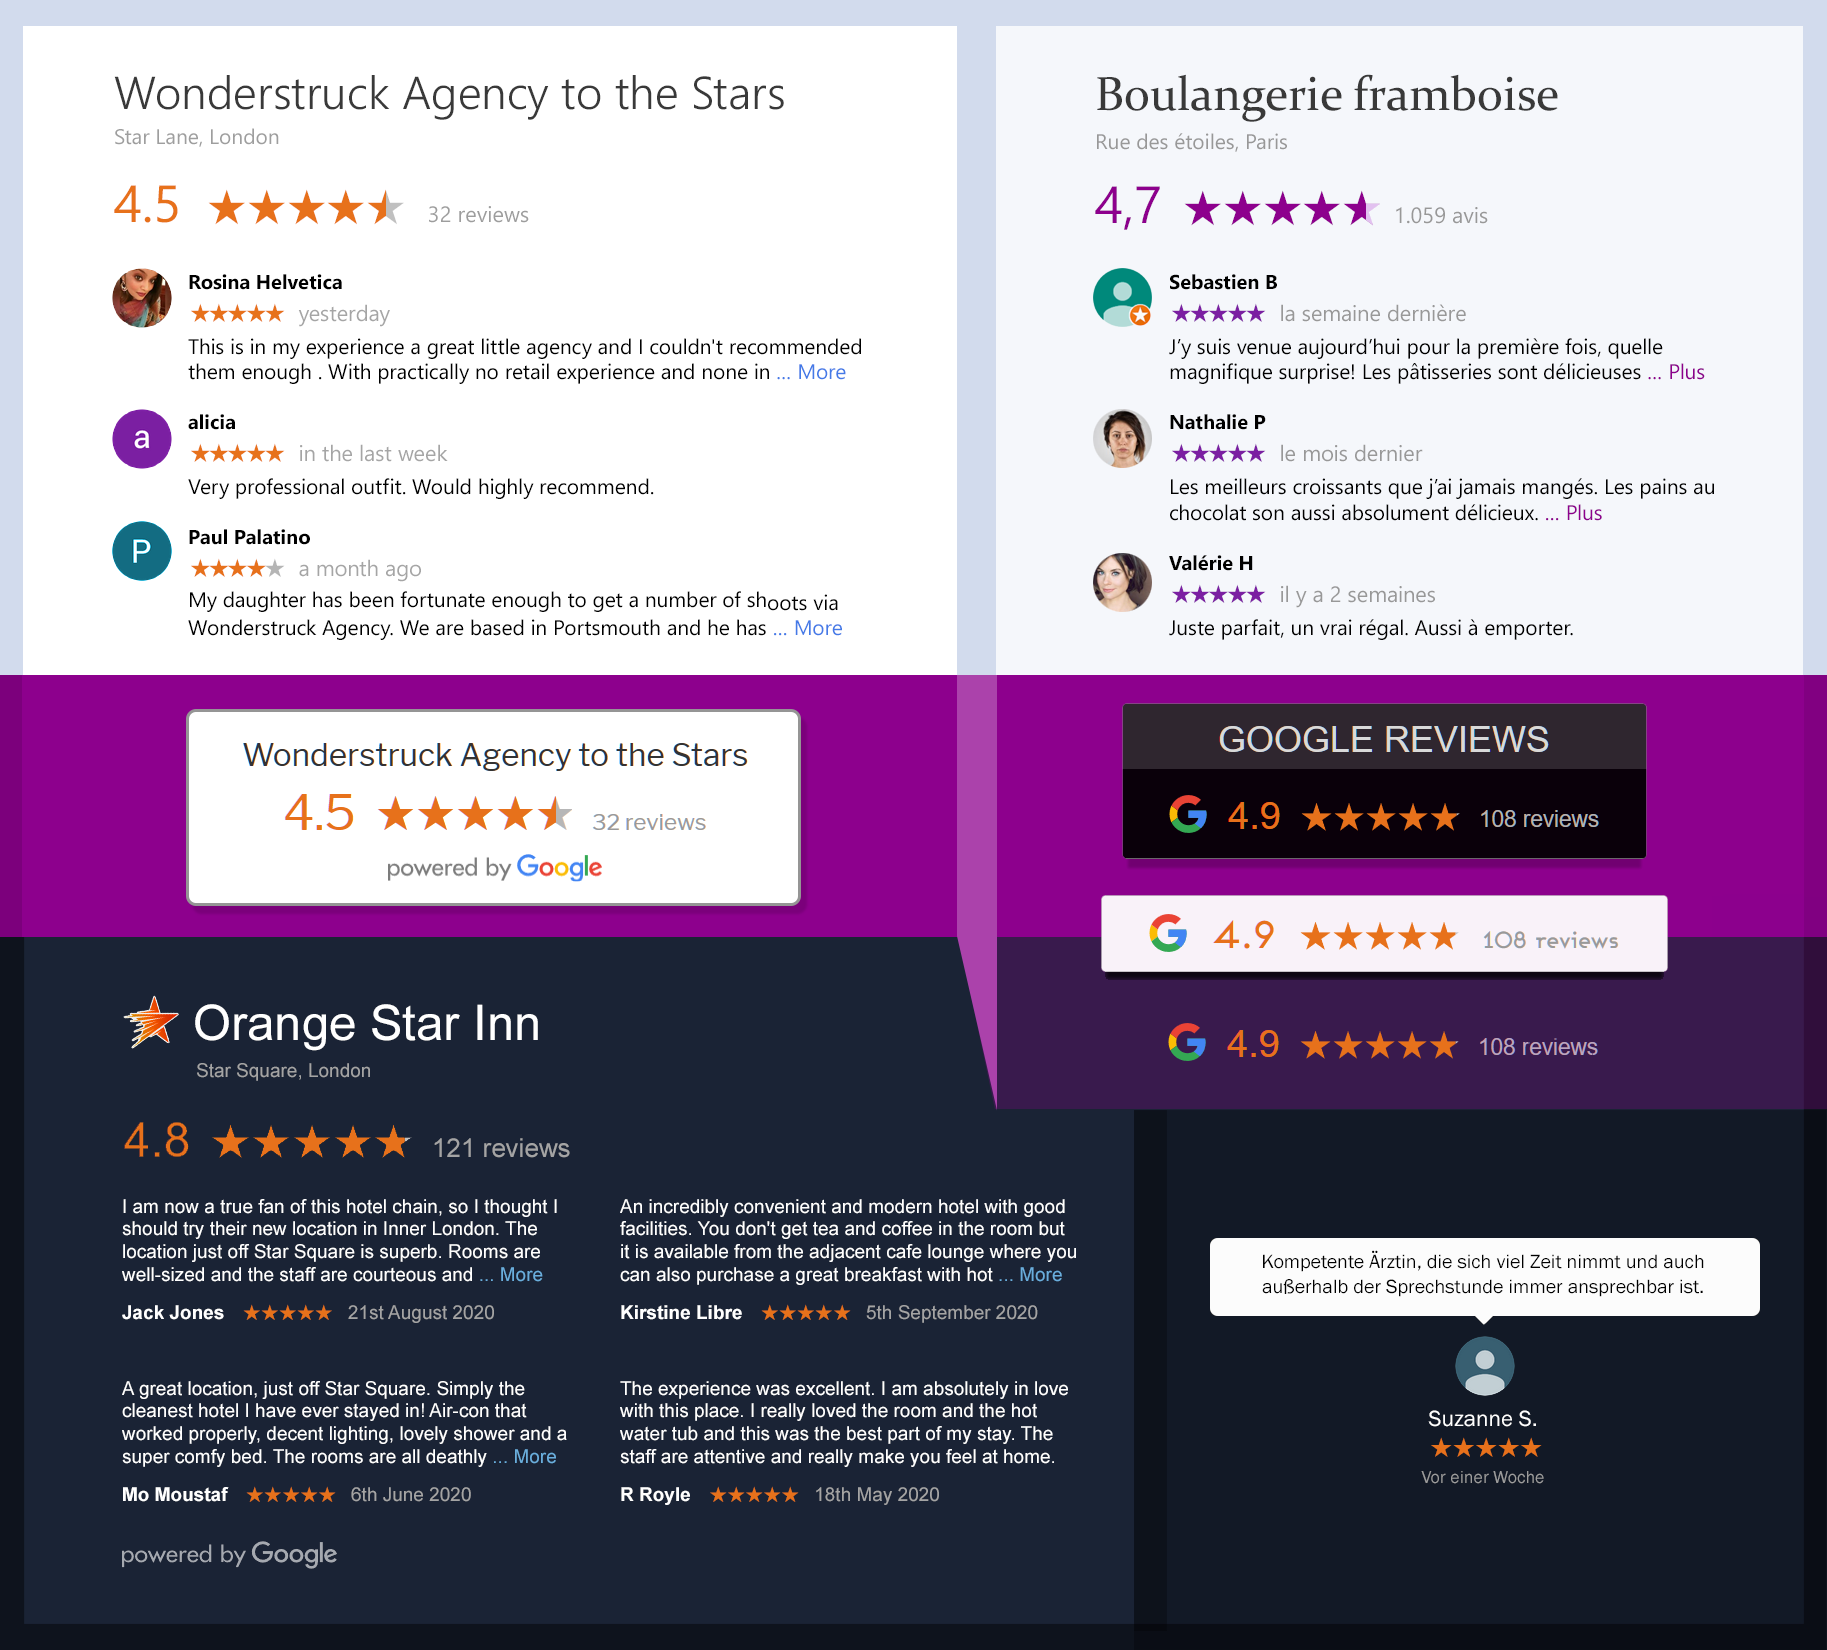 Examples of the reviews listings with Light/Dark themes, badges, multiple columns and bubble themes